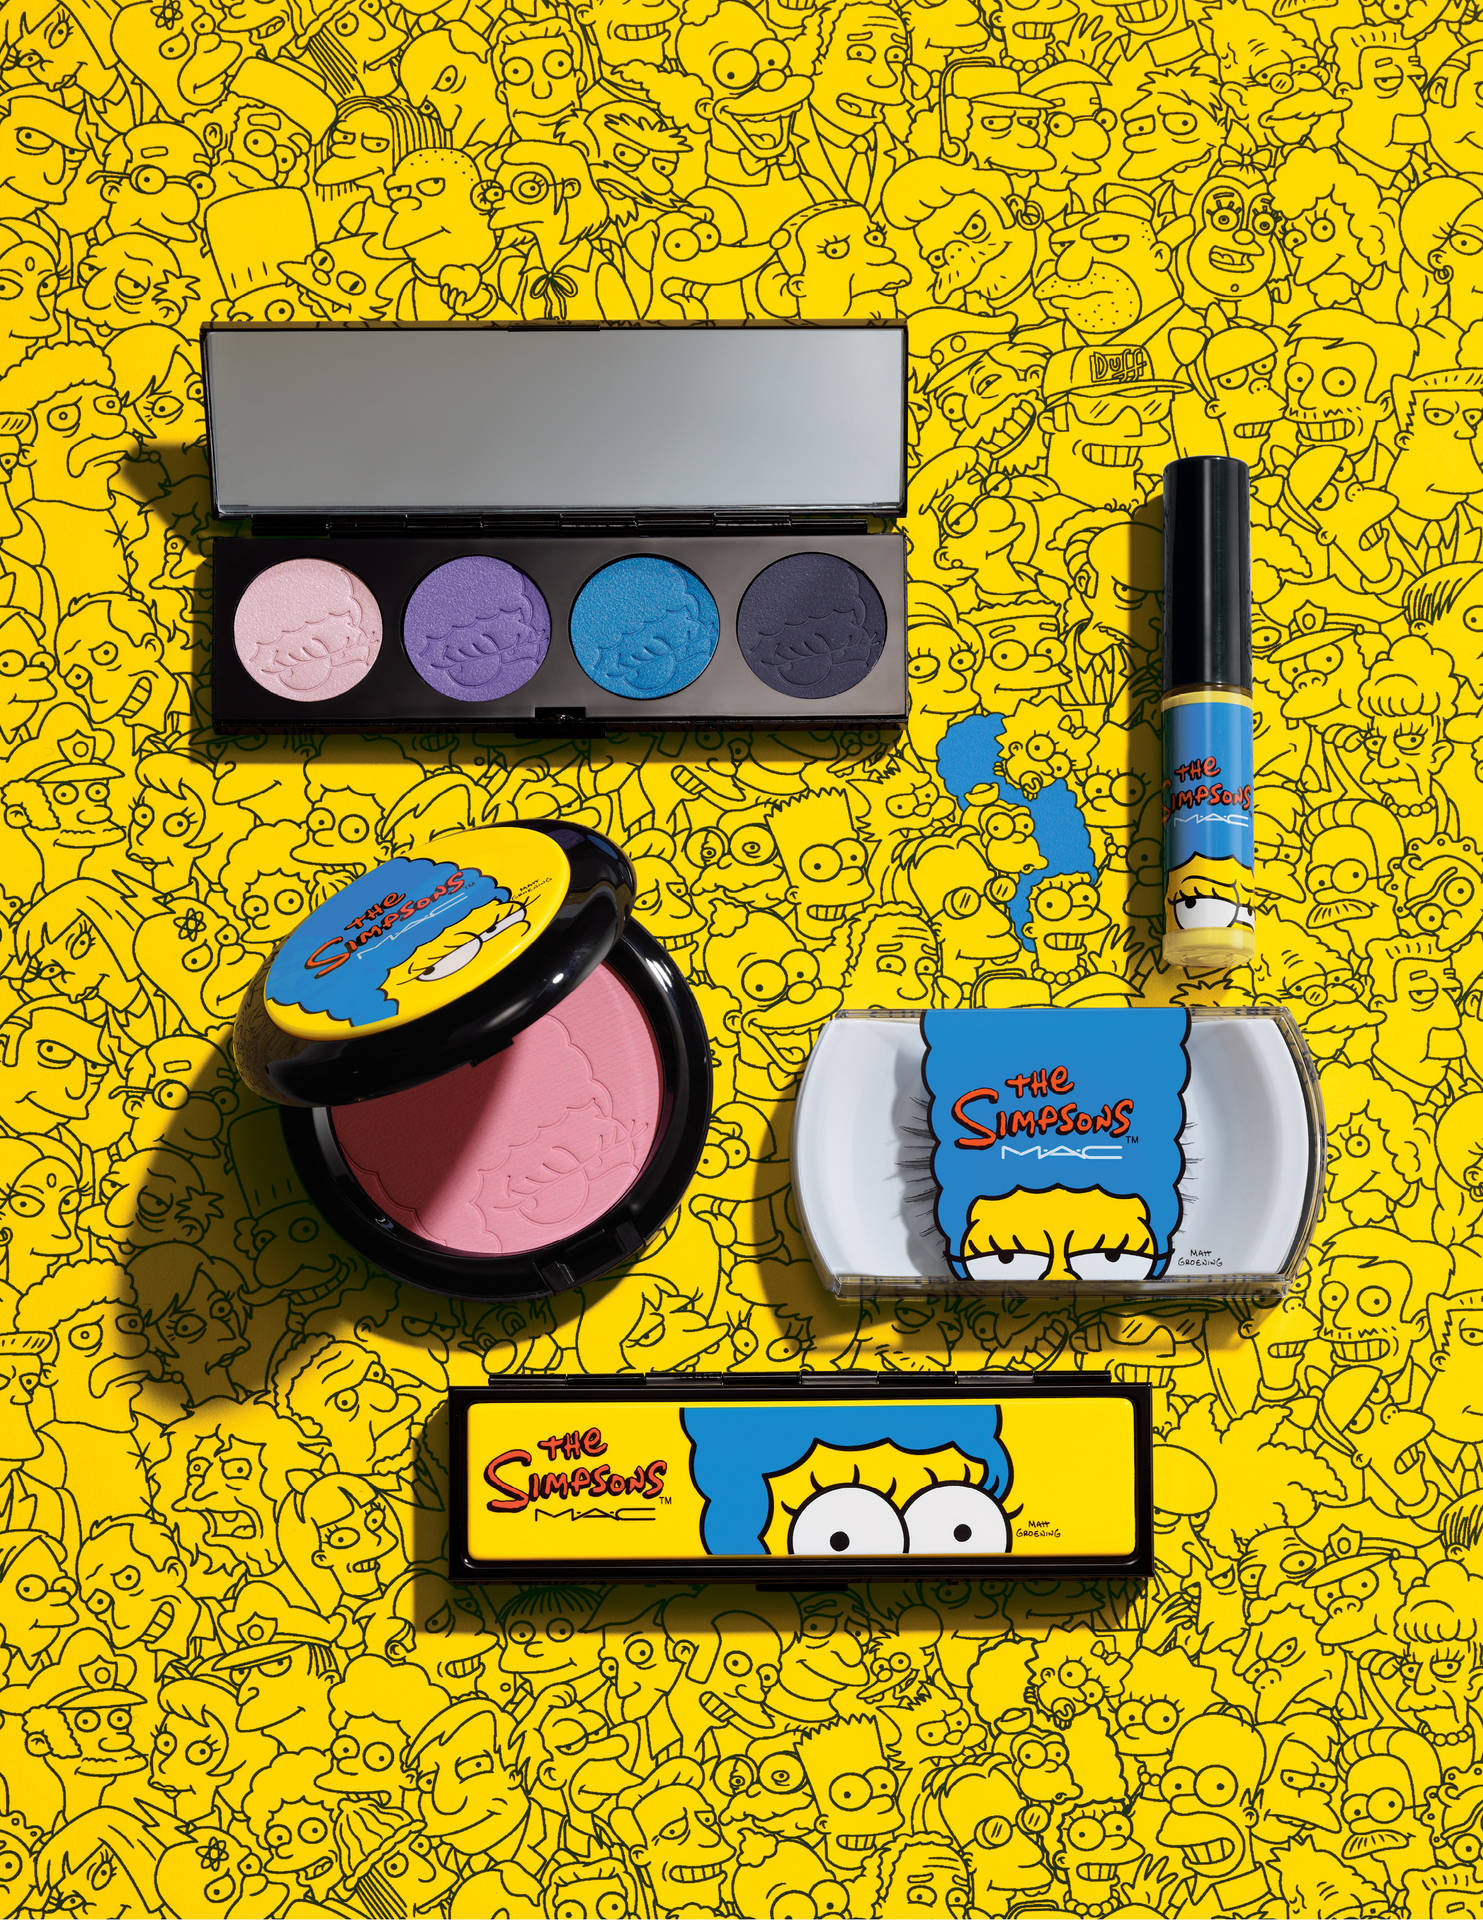 Mac Cosmetics And Simpsons Background